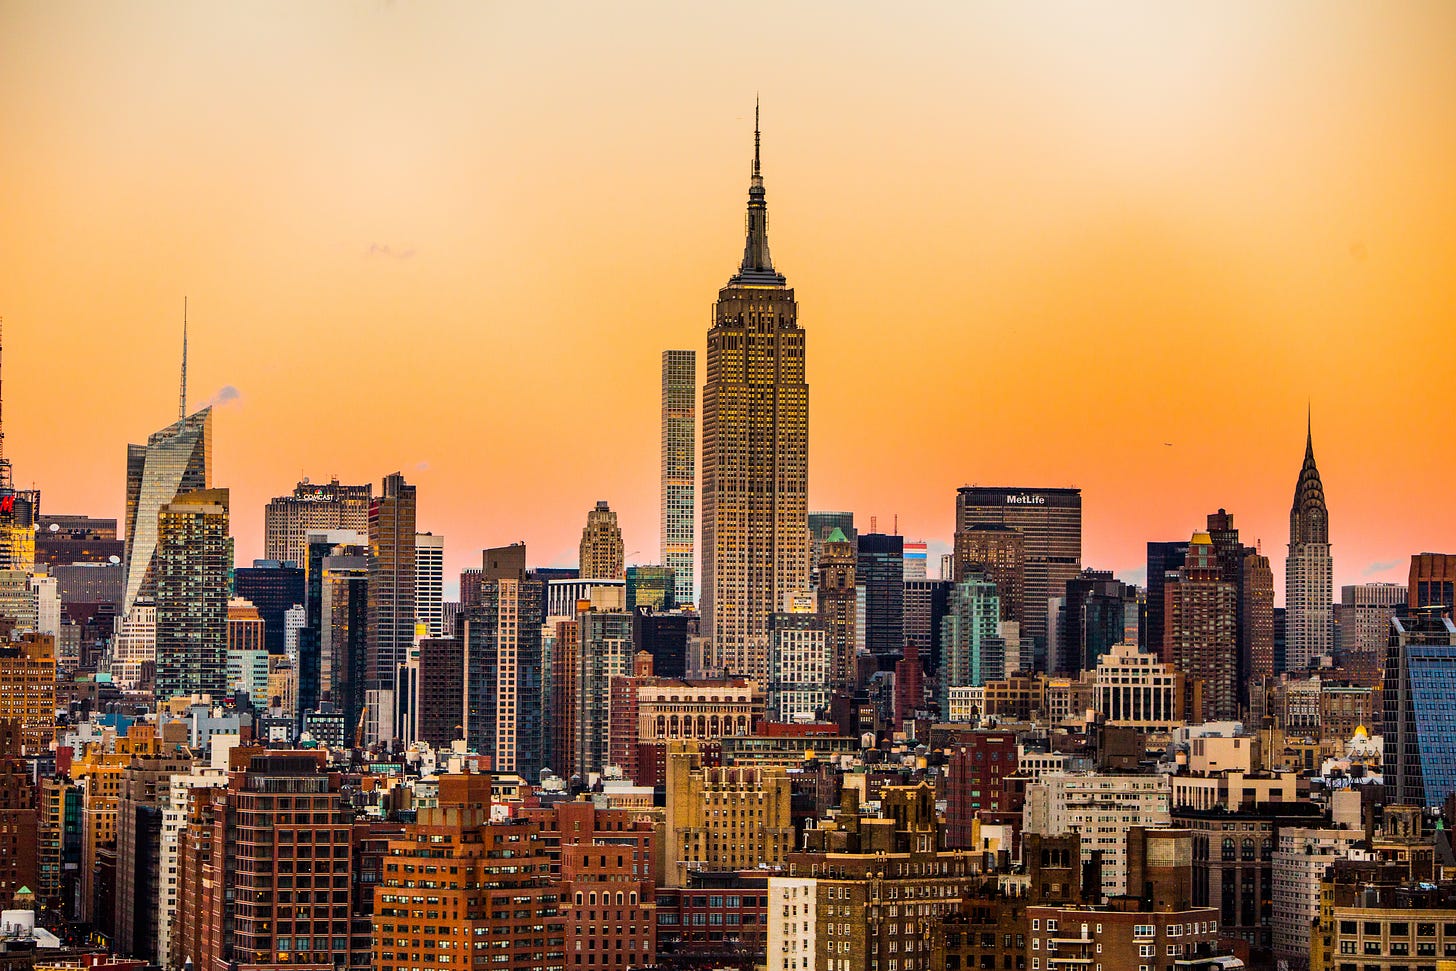 The New York City skyline amidst an orange sky. The Empire State Building rises prominently in the middle of the photo.